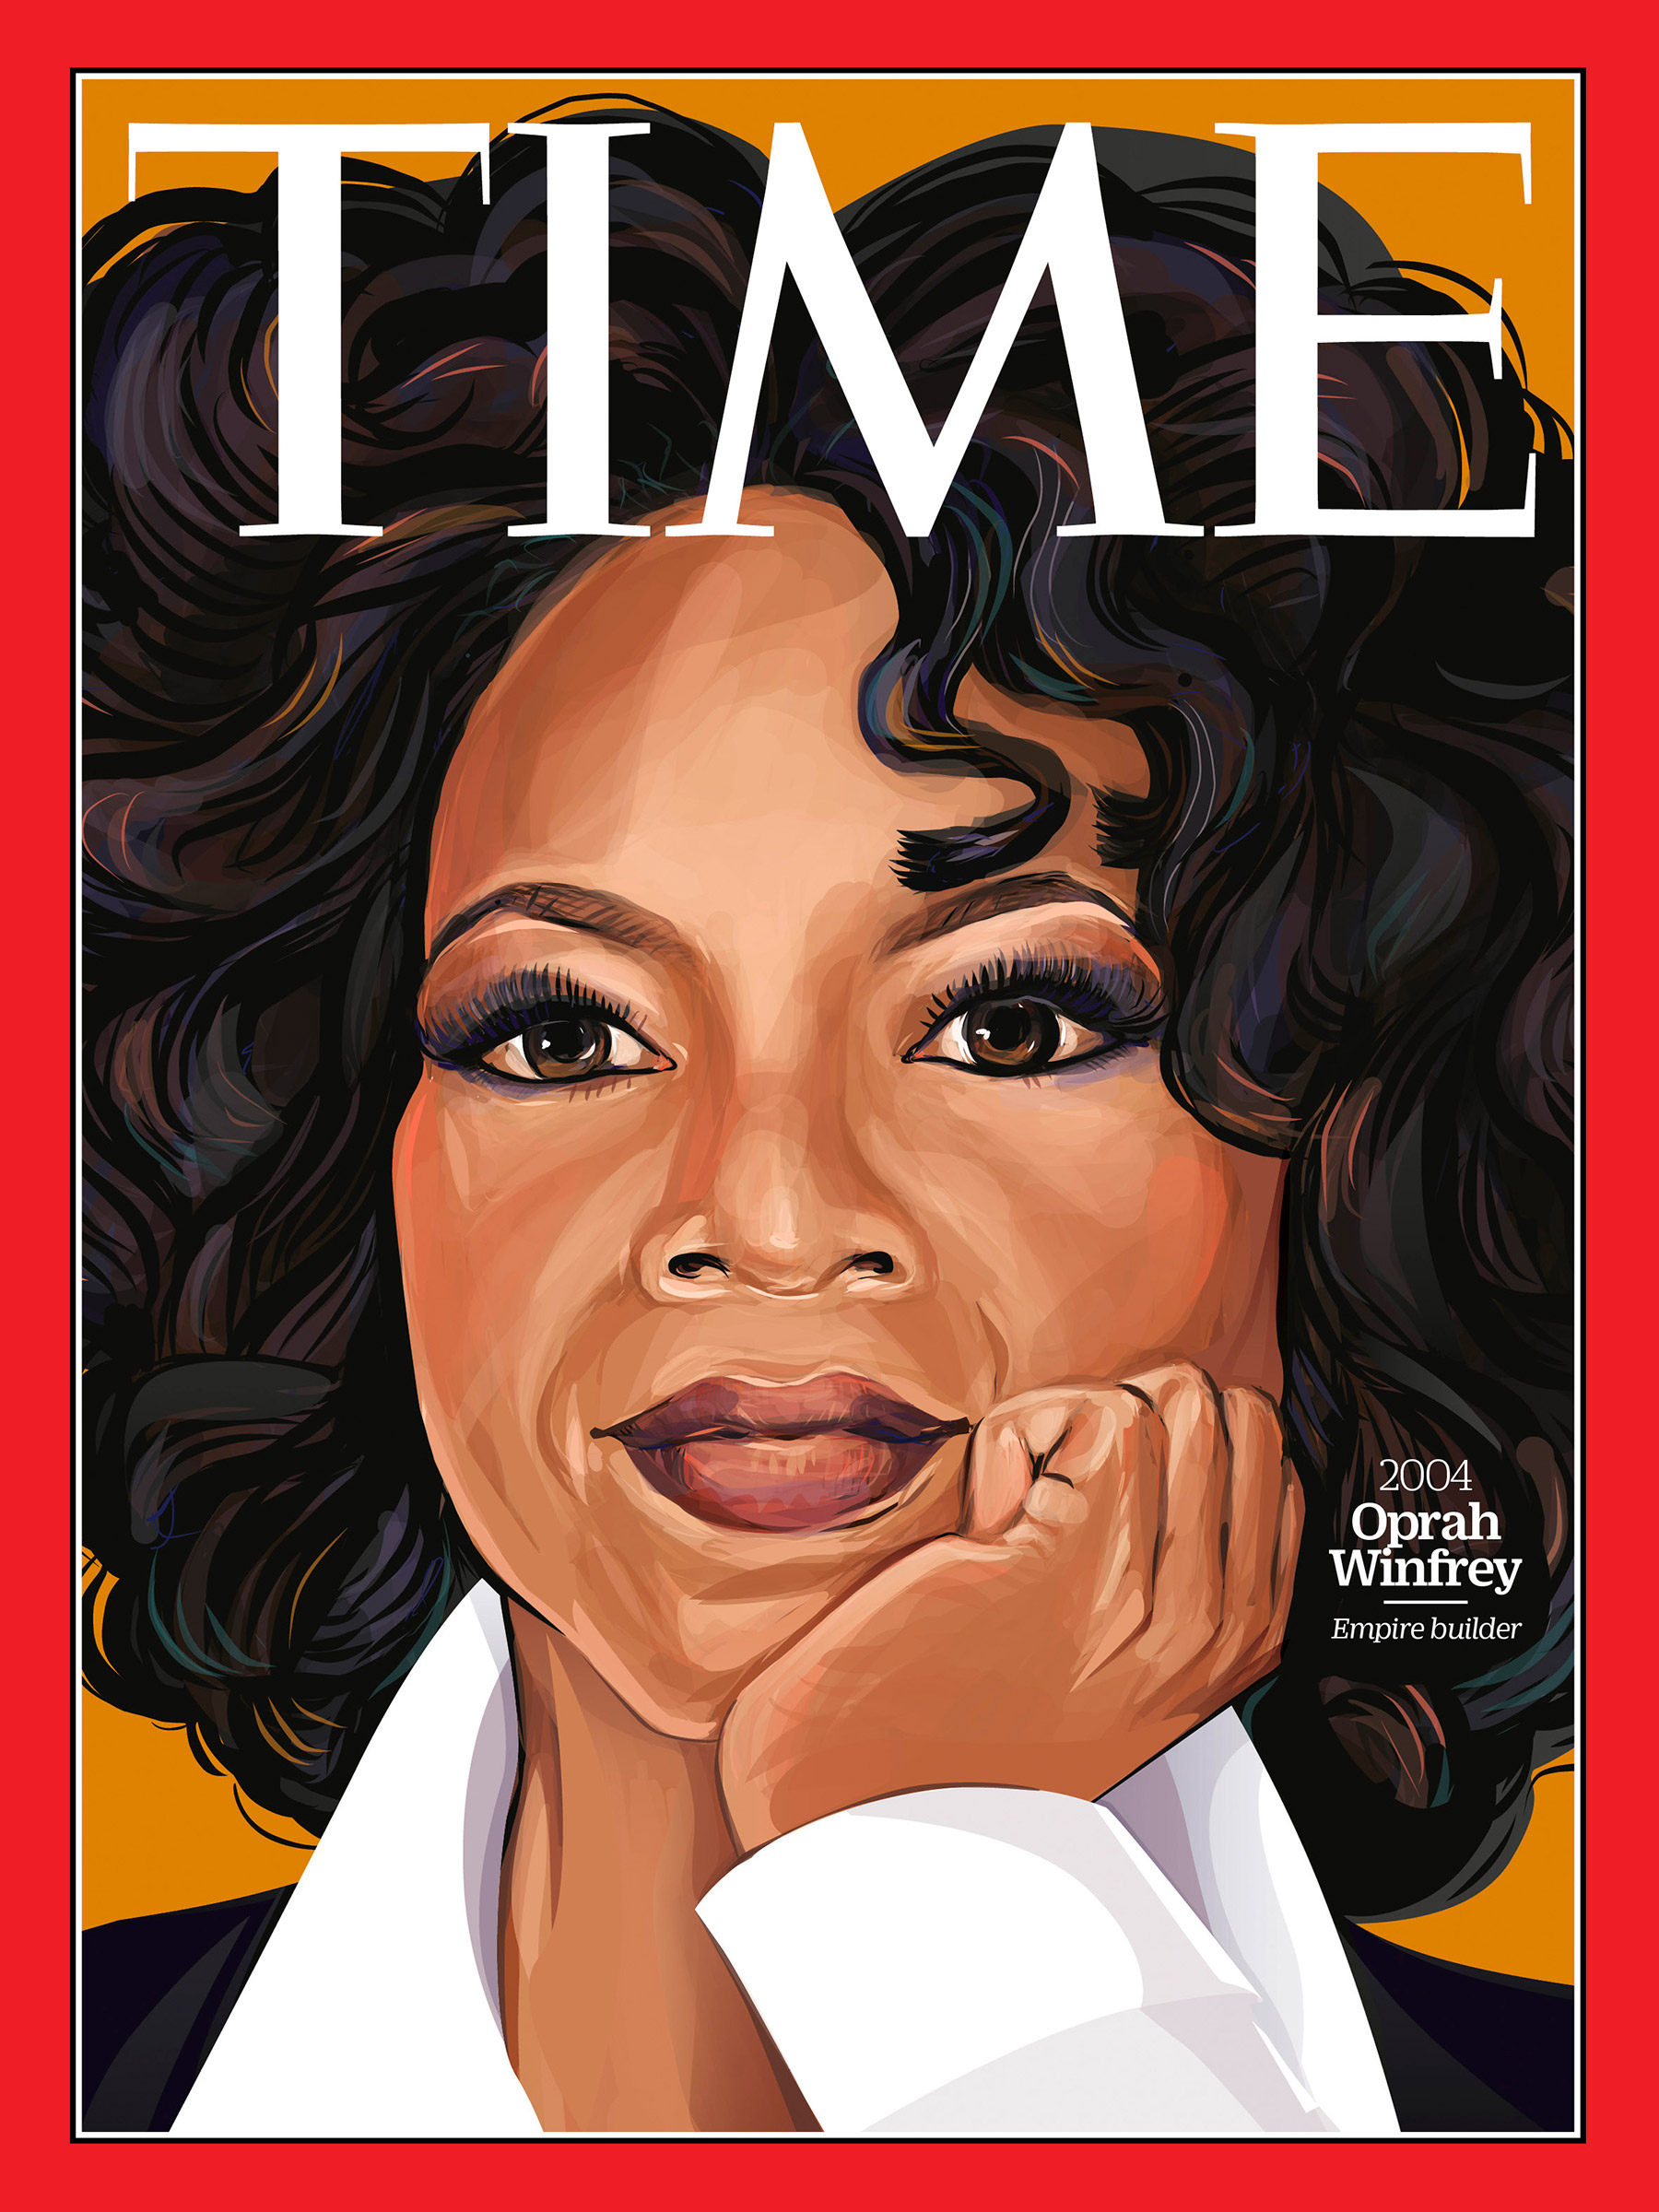 <a href="https://fineartamerica.com/featured/oprah-winfrey-2004-time.html"><strong>Buy the cover art→</strong></a> (Illustration by Amanda Lenz for TIME)